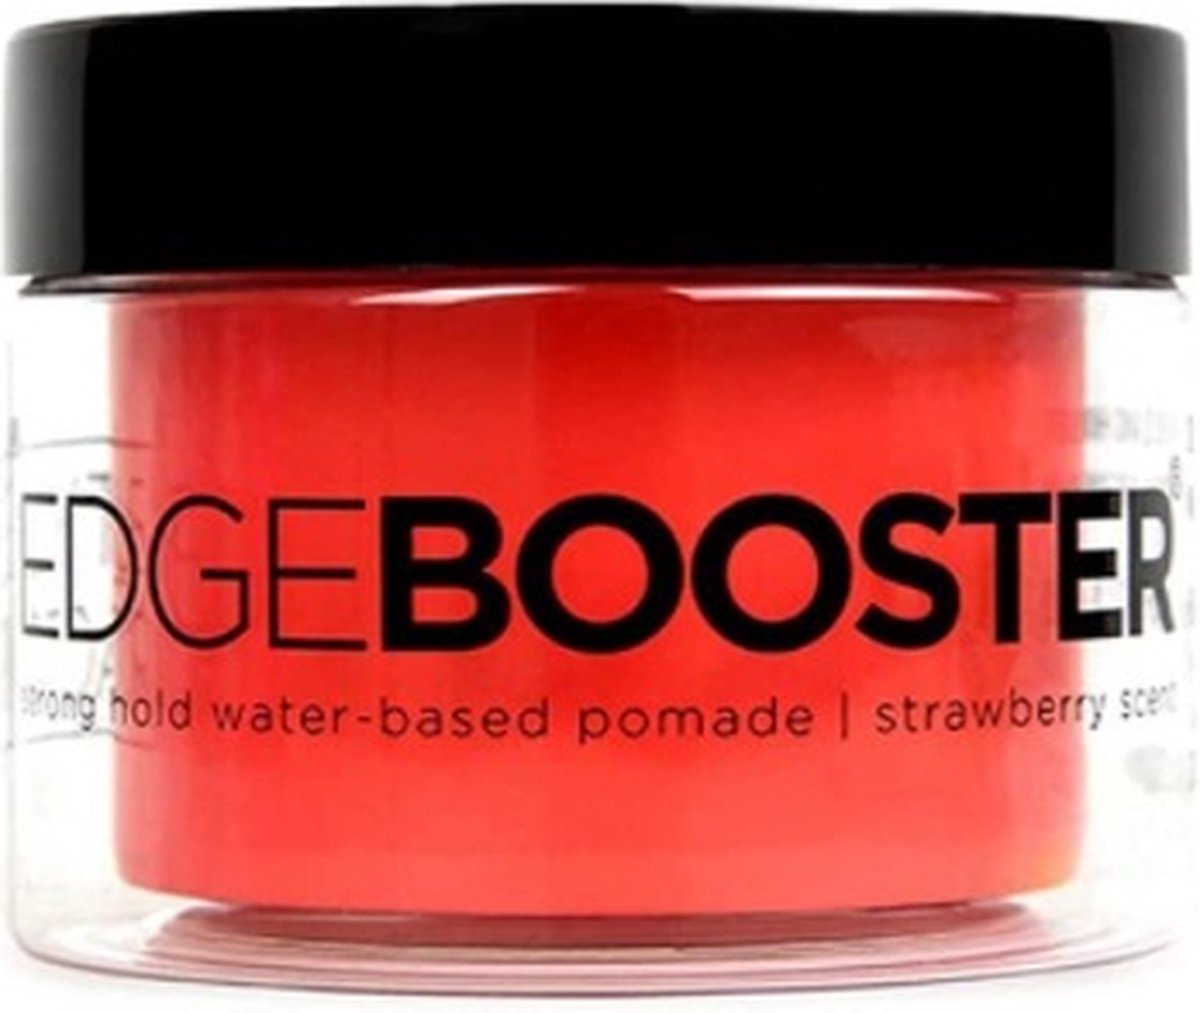 Style Factor Edge Booster Pomade Strawberry